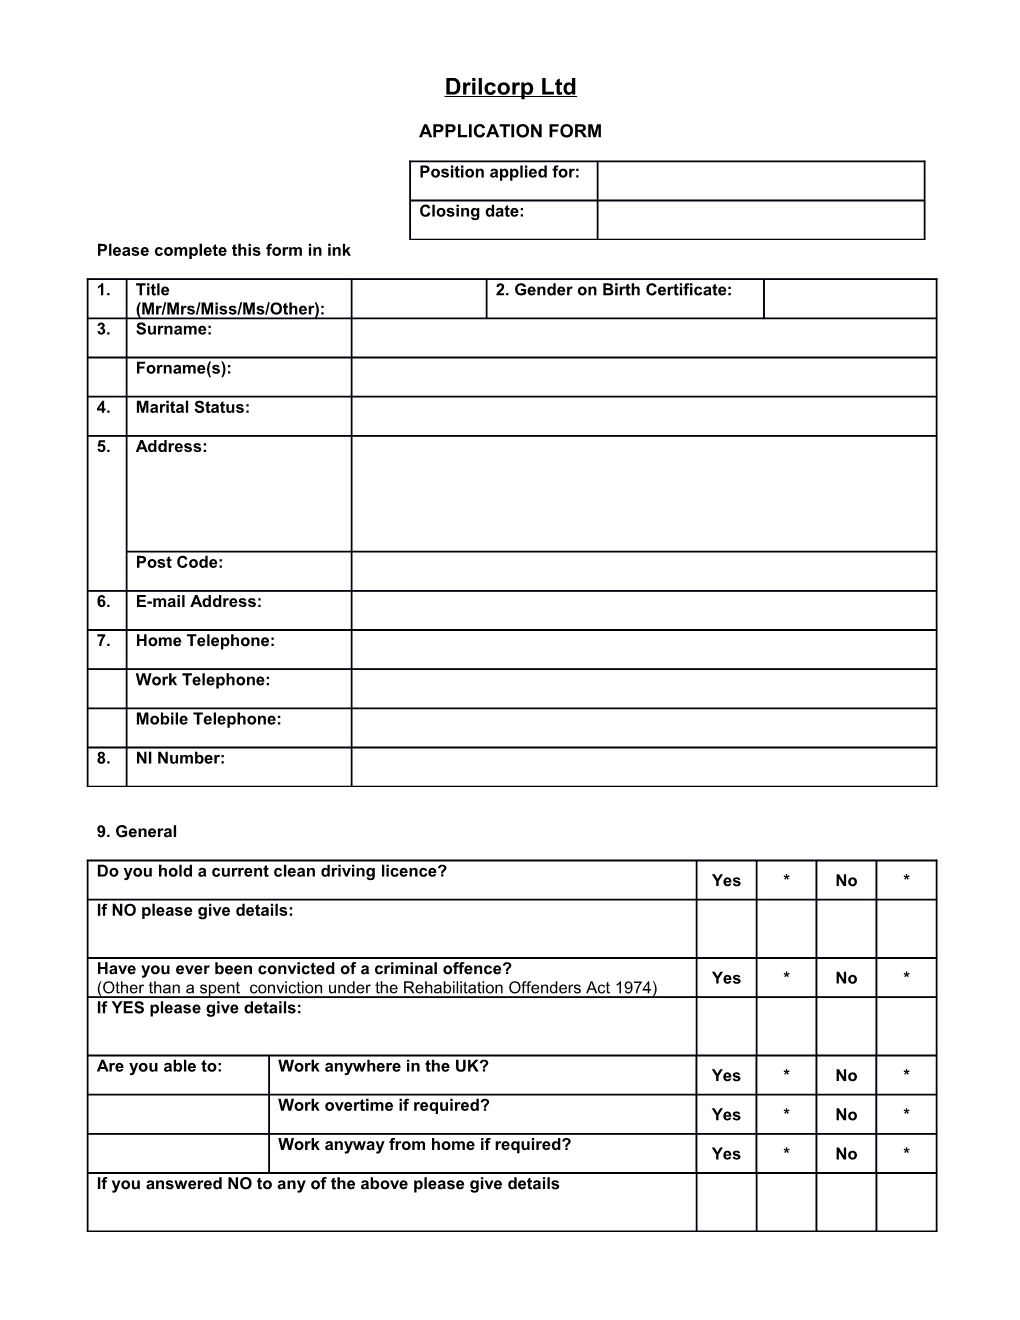 Please Complete This Form in Ink